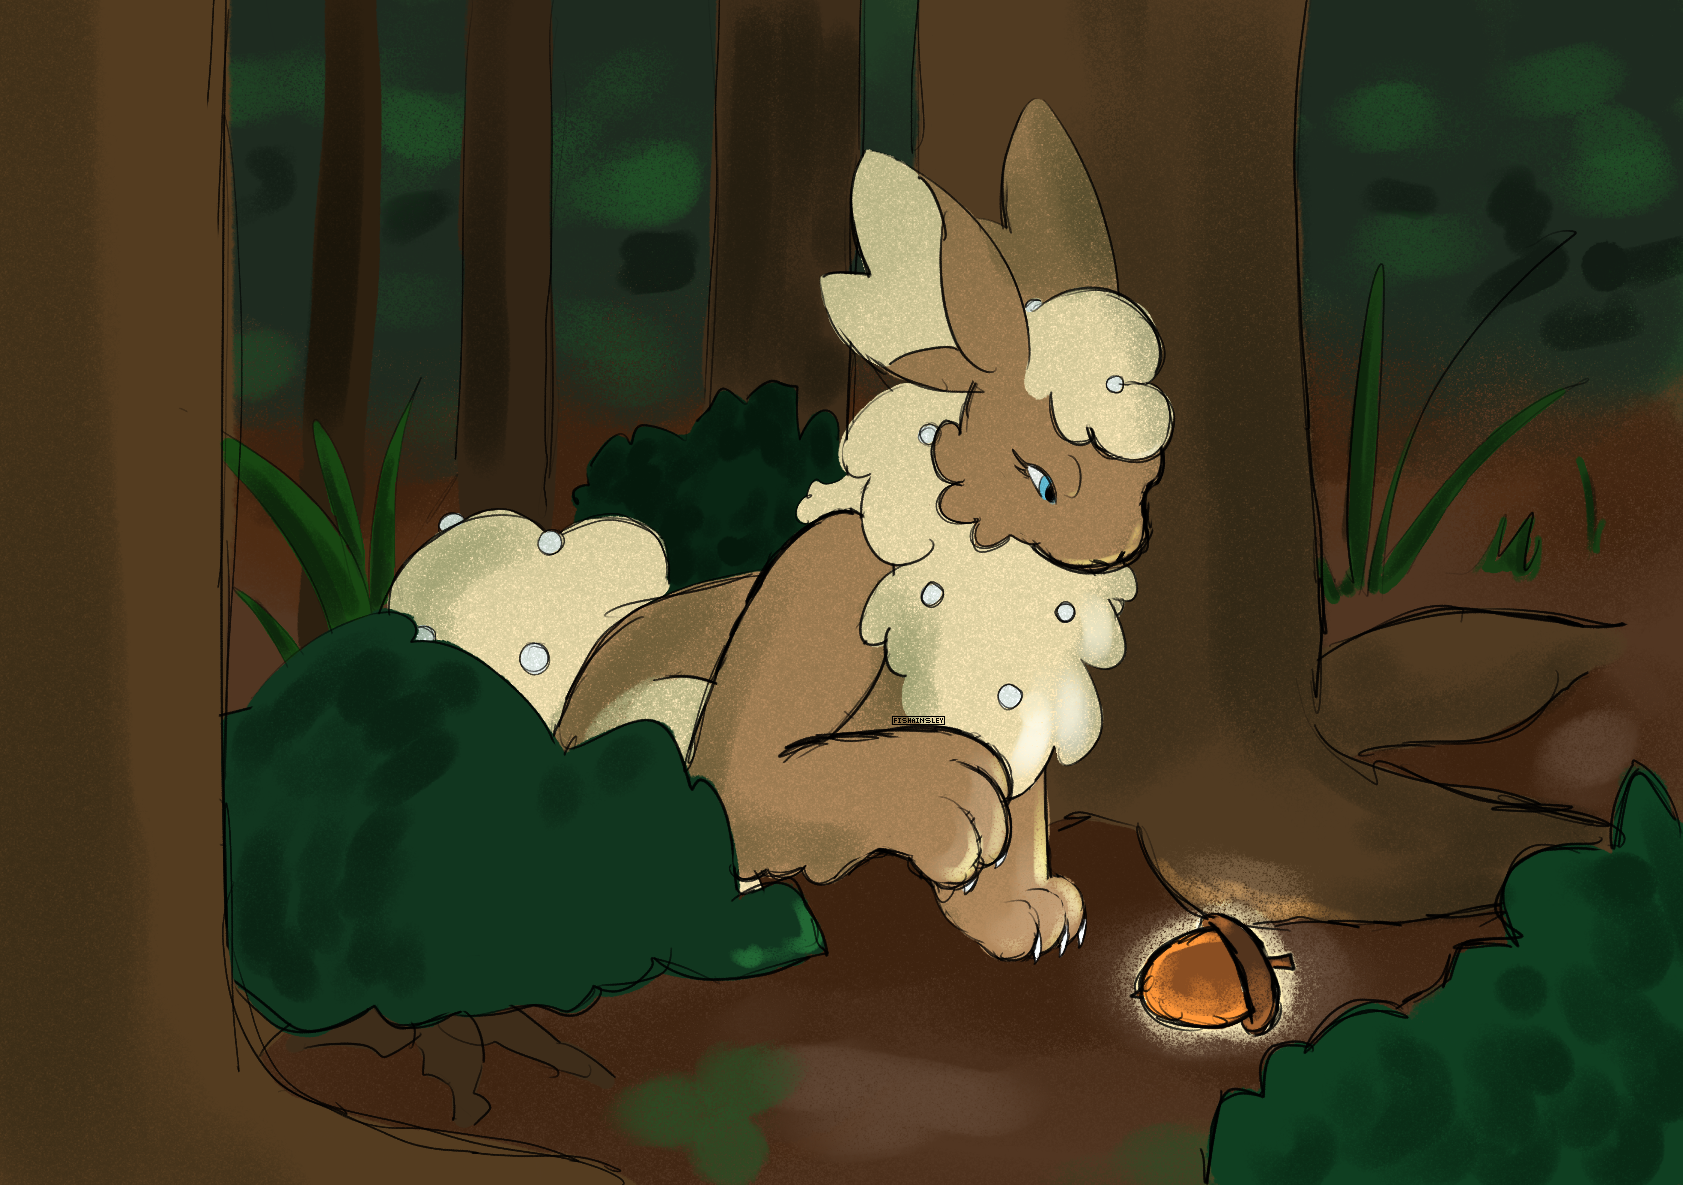 A bunny-like creature suspiciously approaches a glowing acorn in the forest